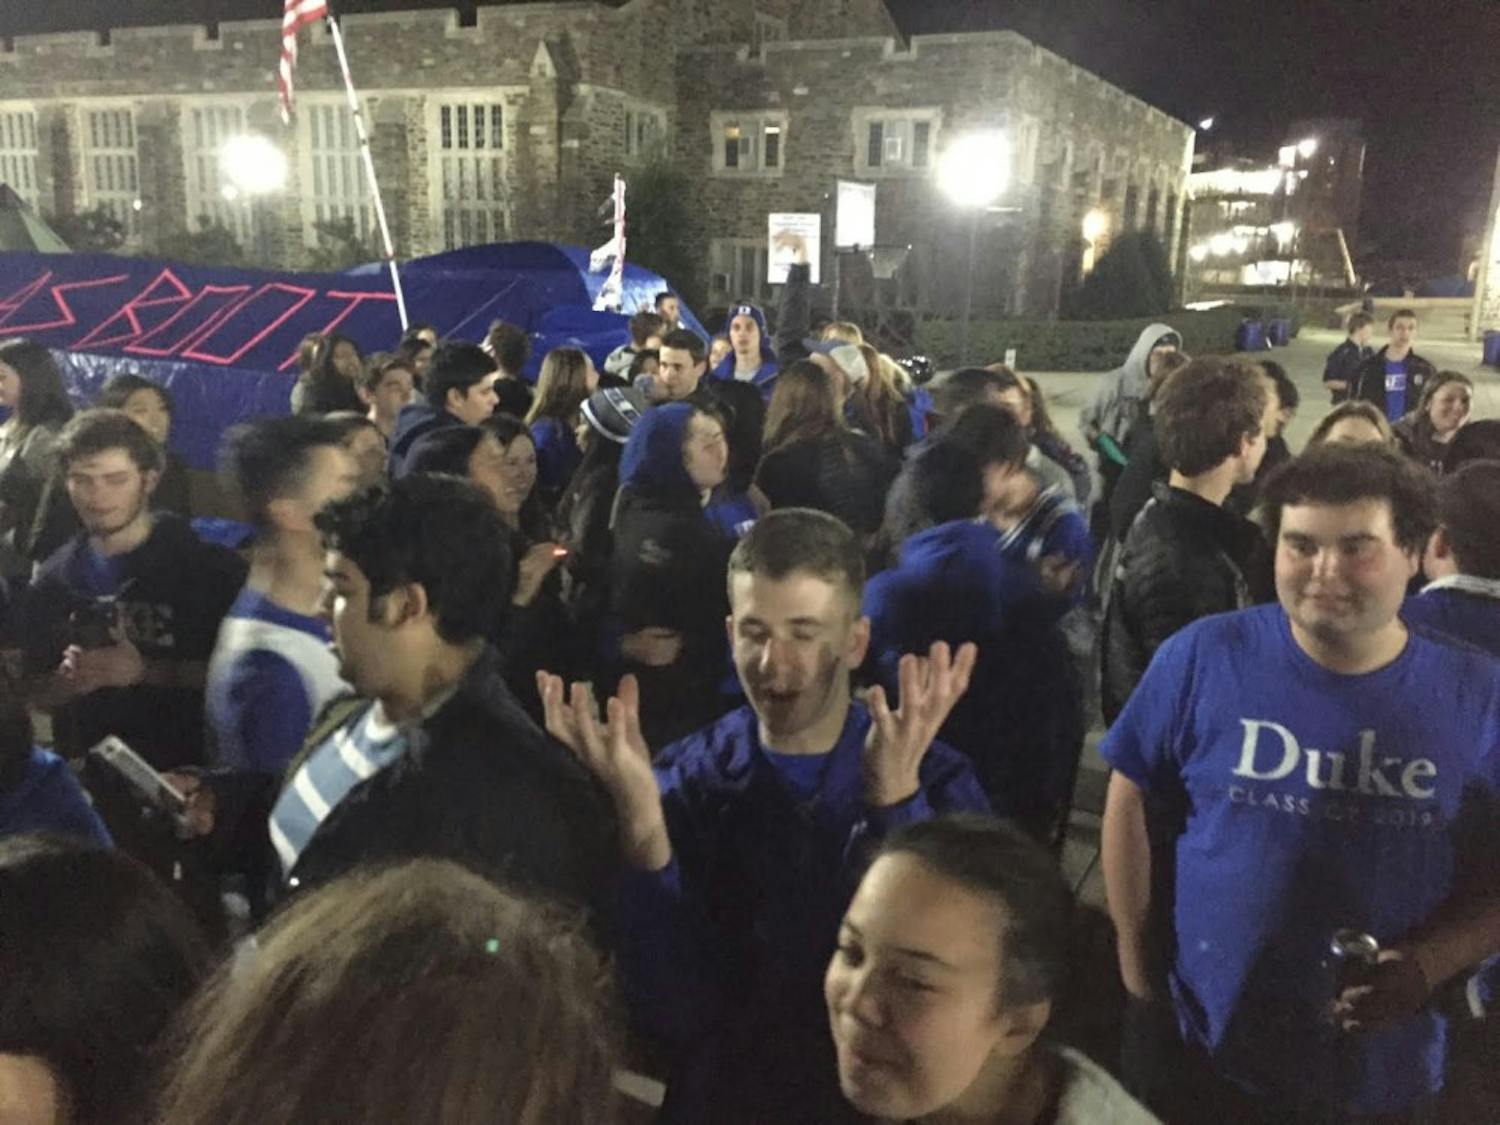 Students waited for the Blue Devils to arrive following their win at Chapel Hill early Thursday morning.